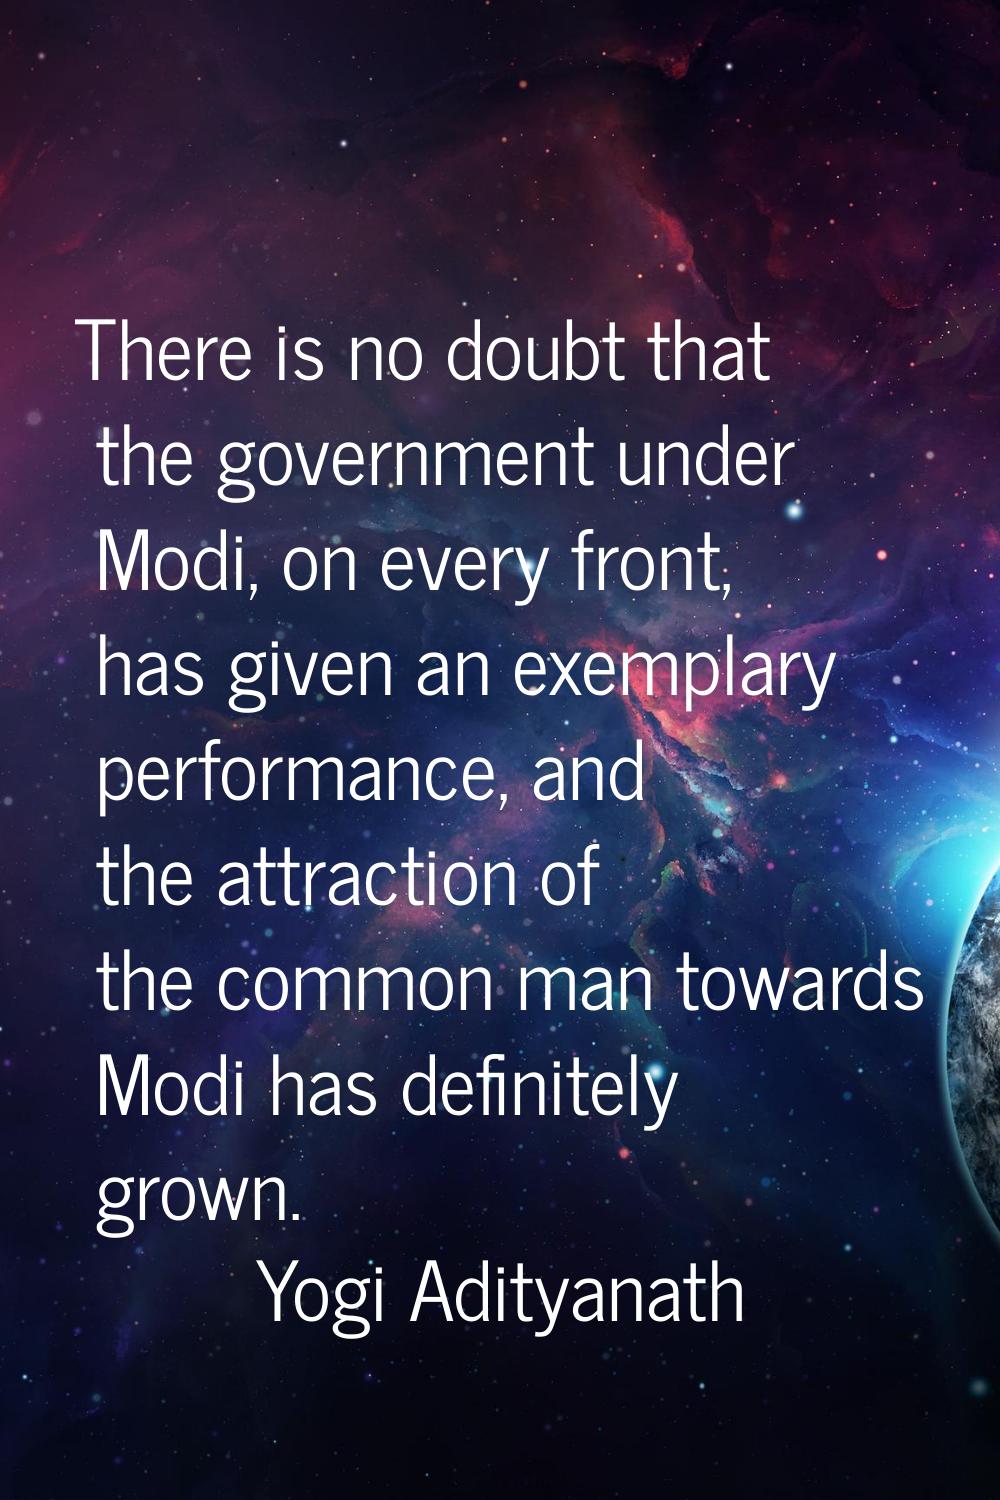 There is no doubt that the government under Modi, on every front, has given an exemplary performanc